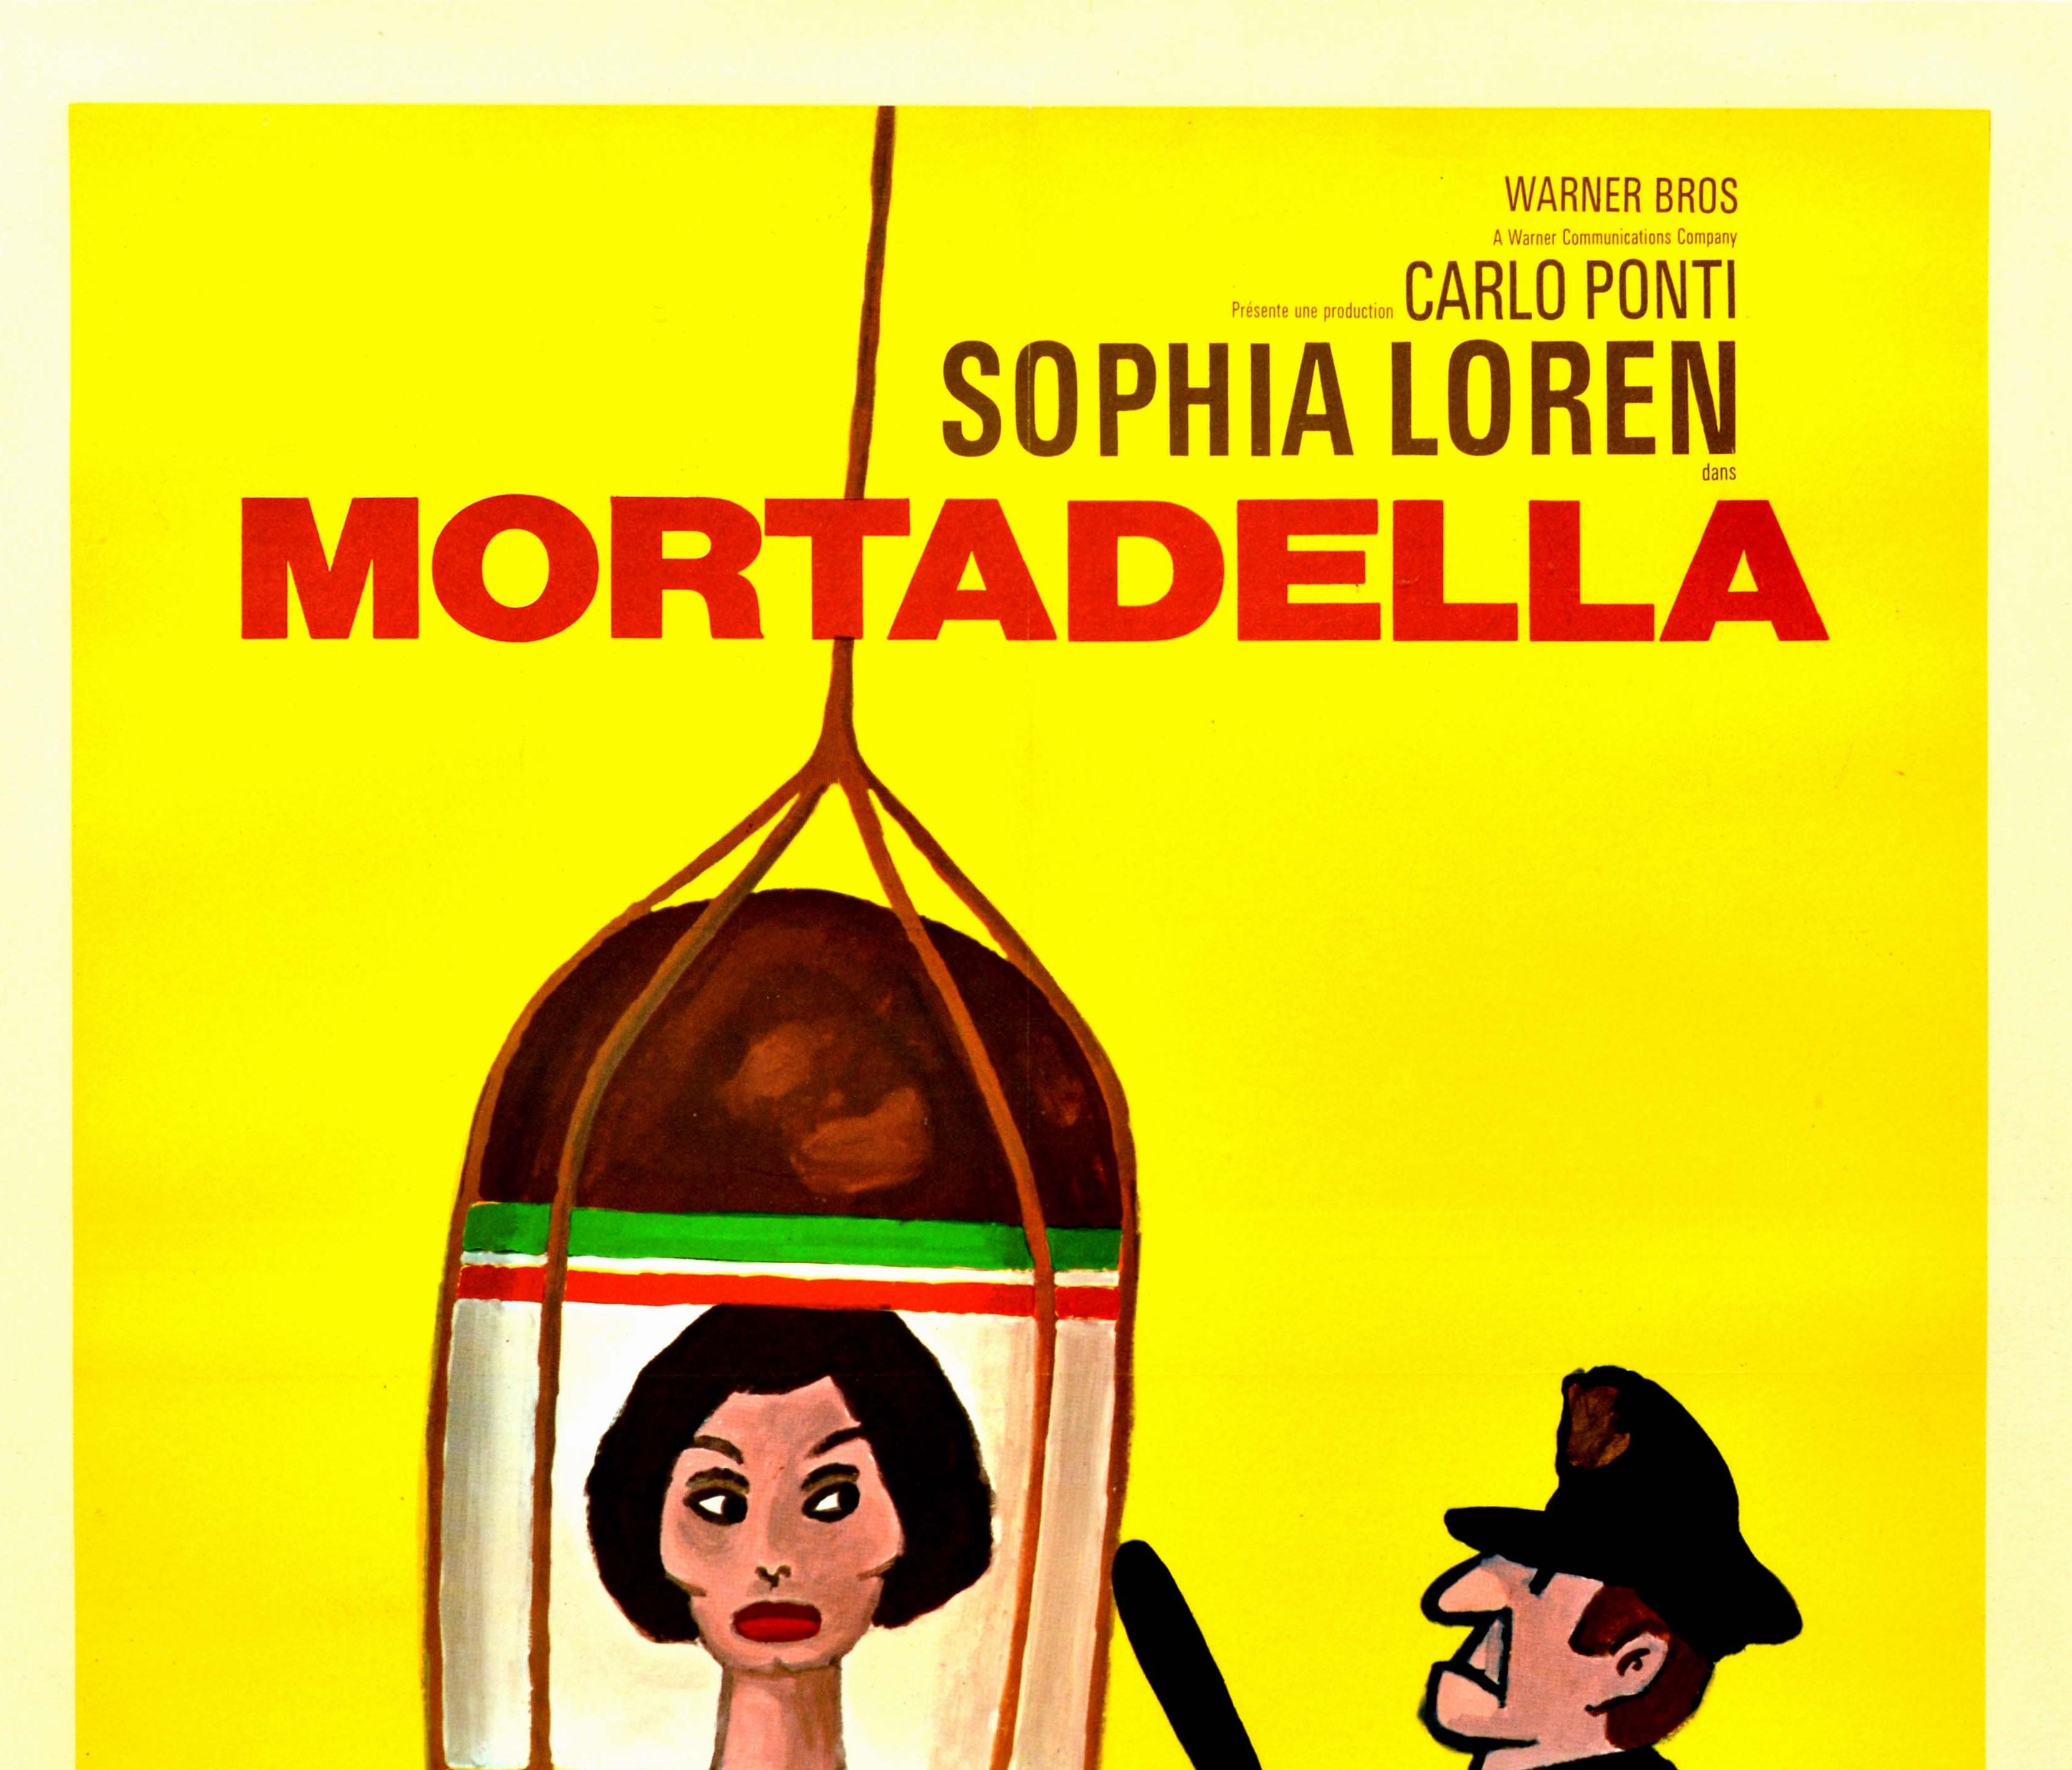 Original vintage film poster for the comedy film Mortadella / Lady Liberty directed by Mario Monicelli and produced by Carlo Ponti starring Sophia Loren as an Italian lady Maddalena Ciarrapico, who arrives in America and is held by US Customs for